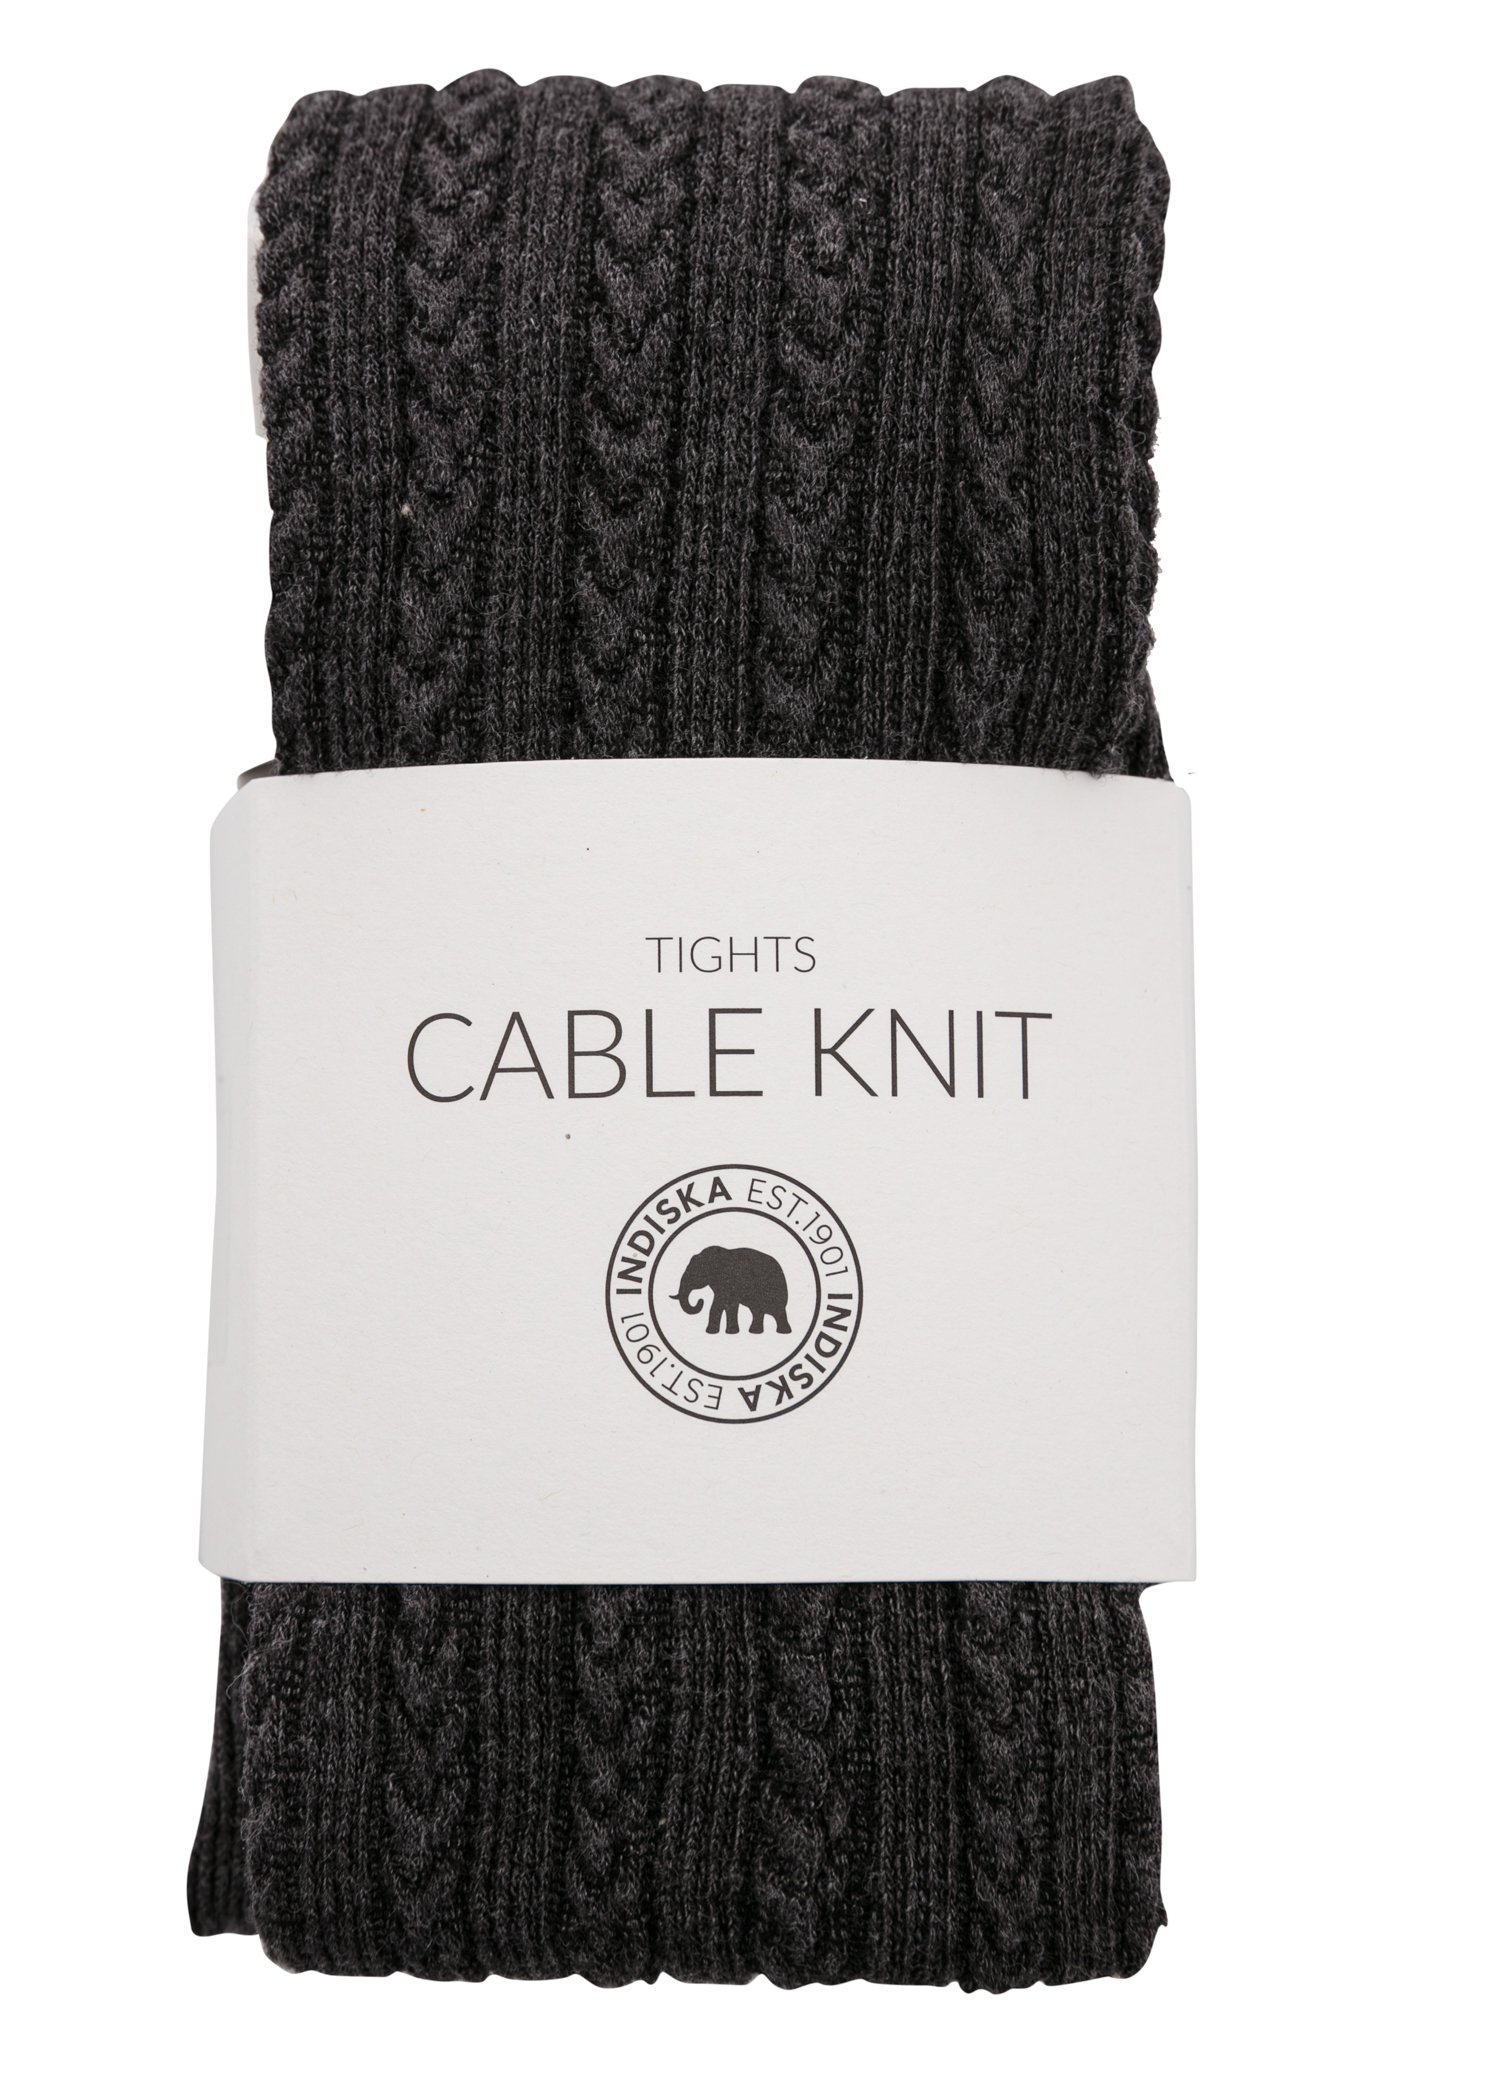 Cable knit tights